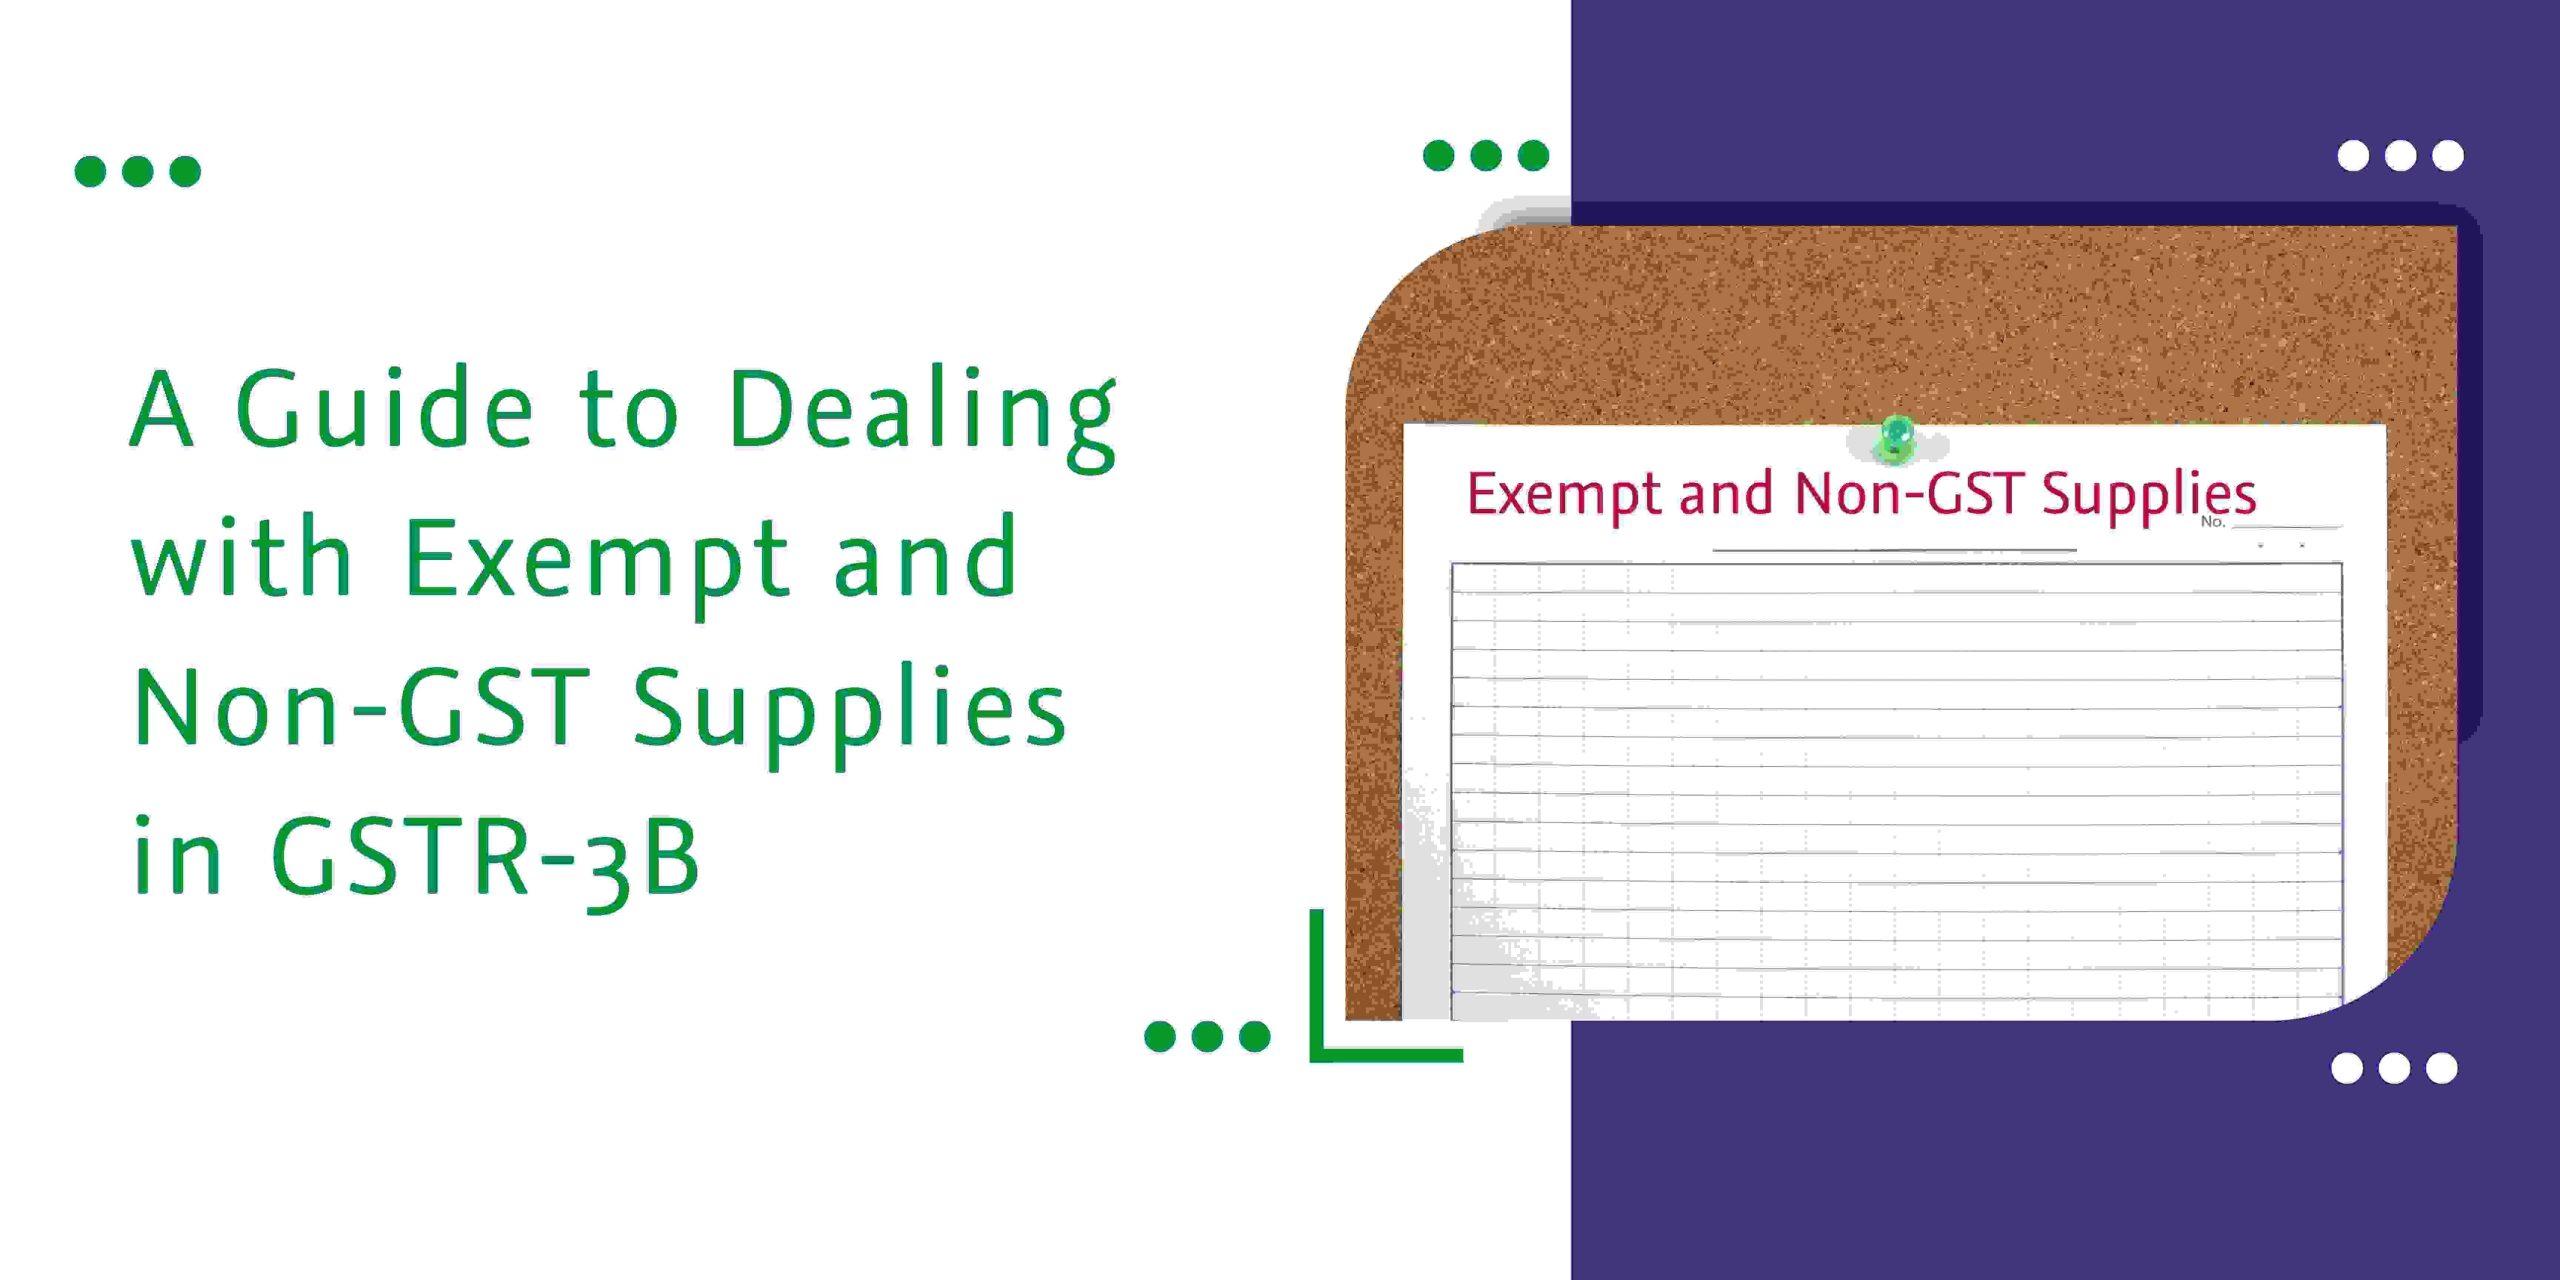 CaptainBiz: A Guide to Dealing with Exempt and Non-GST Supplies in GSTR-3B